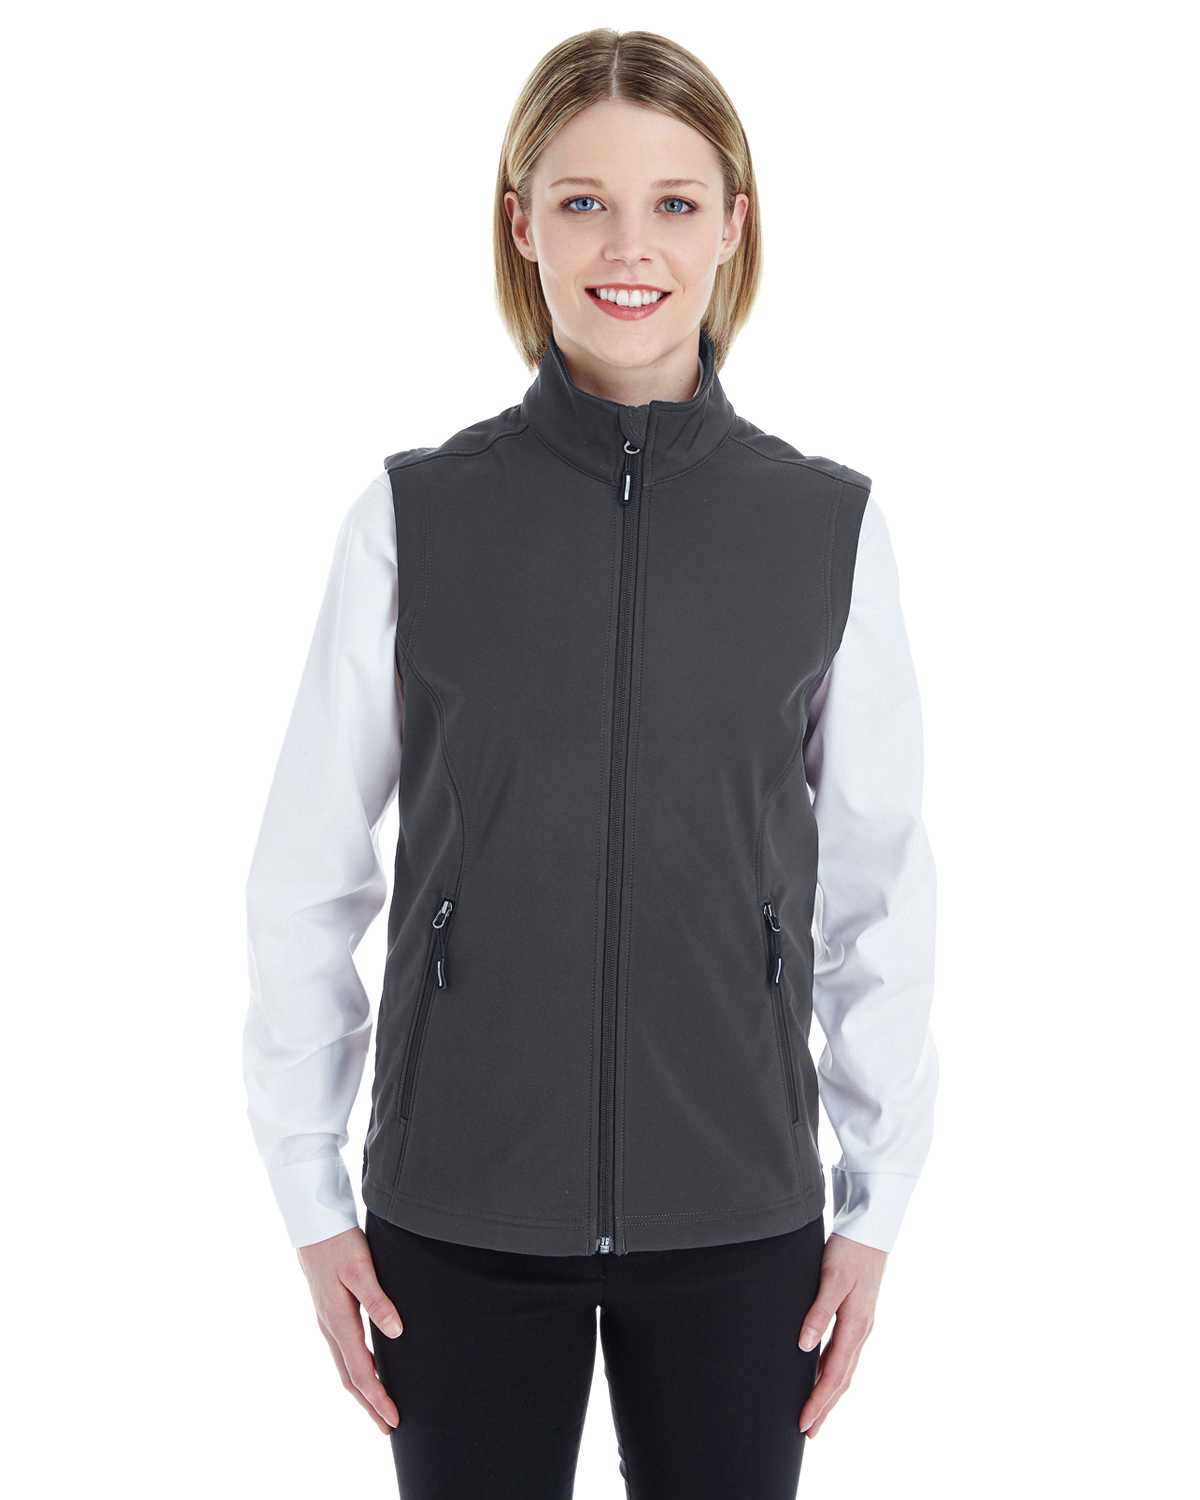 Core365 CE701W Ladies' Cruise Two-Layer Fleece Bonded Soft Shell Vest ...